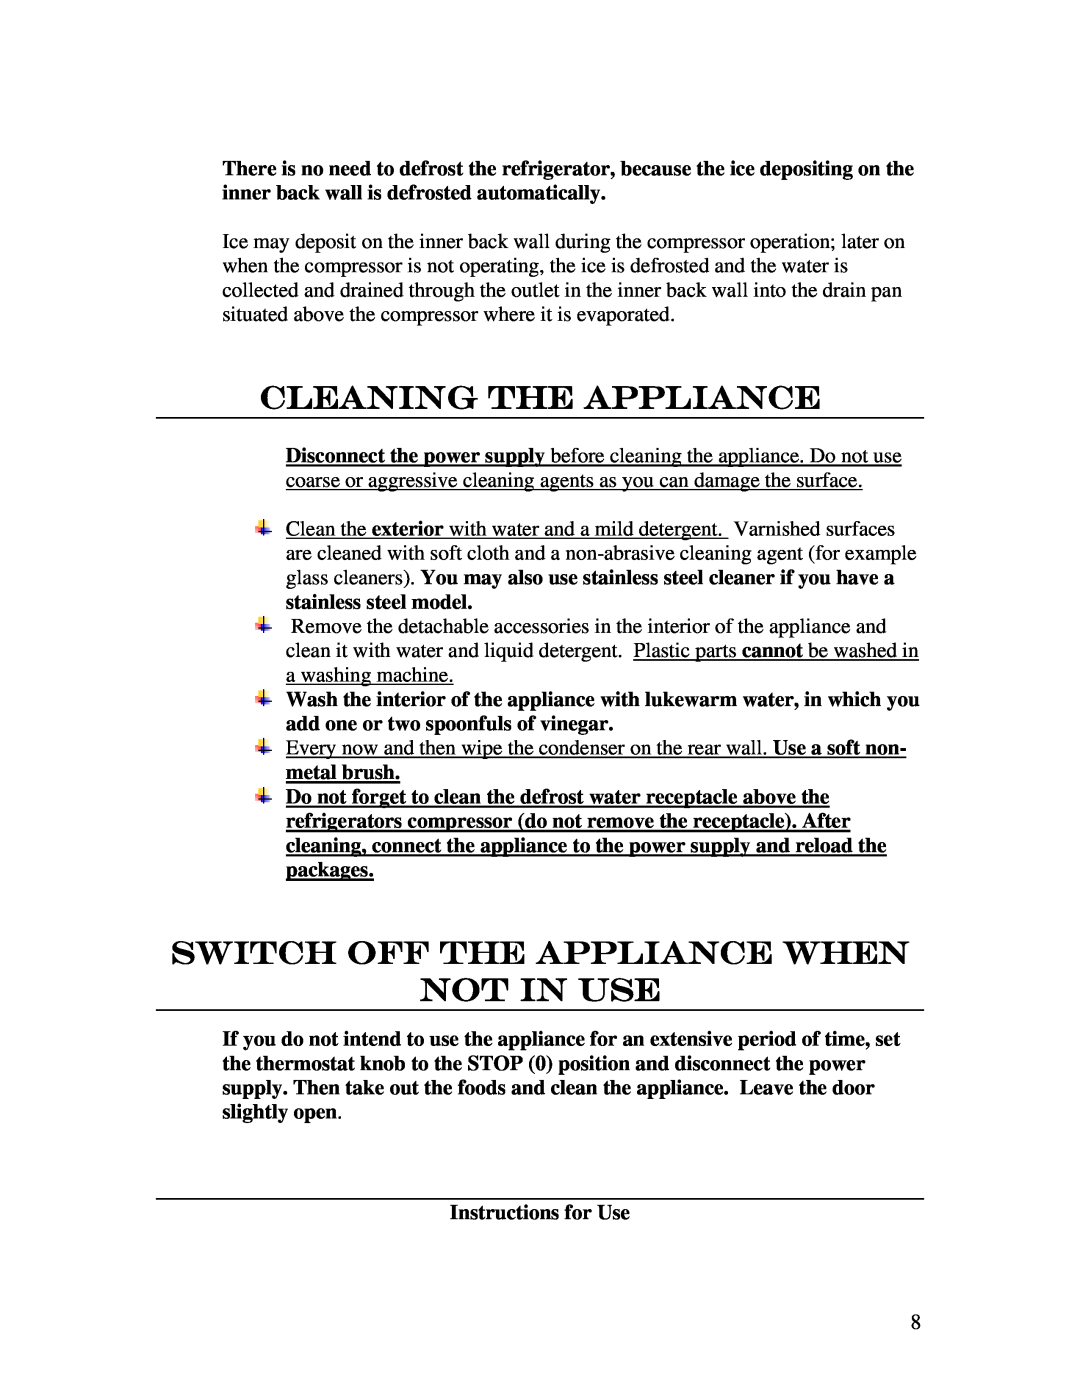 Summit FF-7, FF-6 instruction manual Cleaning the Appliance, Switch Off the Appliance When Not in Use 